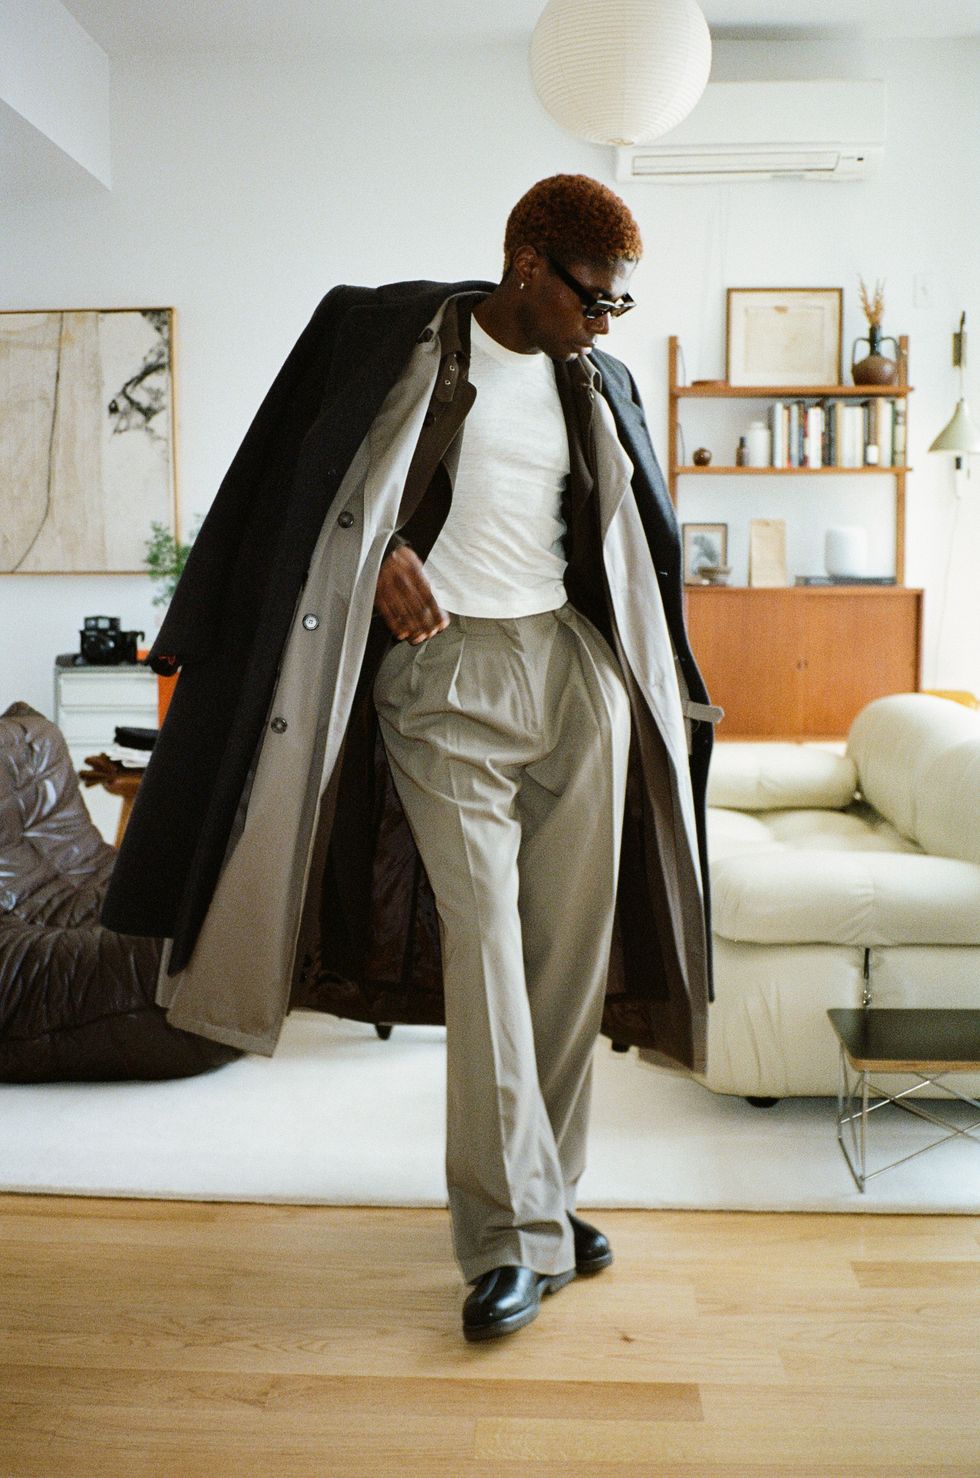 Deon Hinton in Layers of Trench Coats